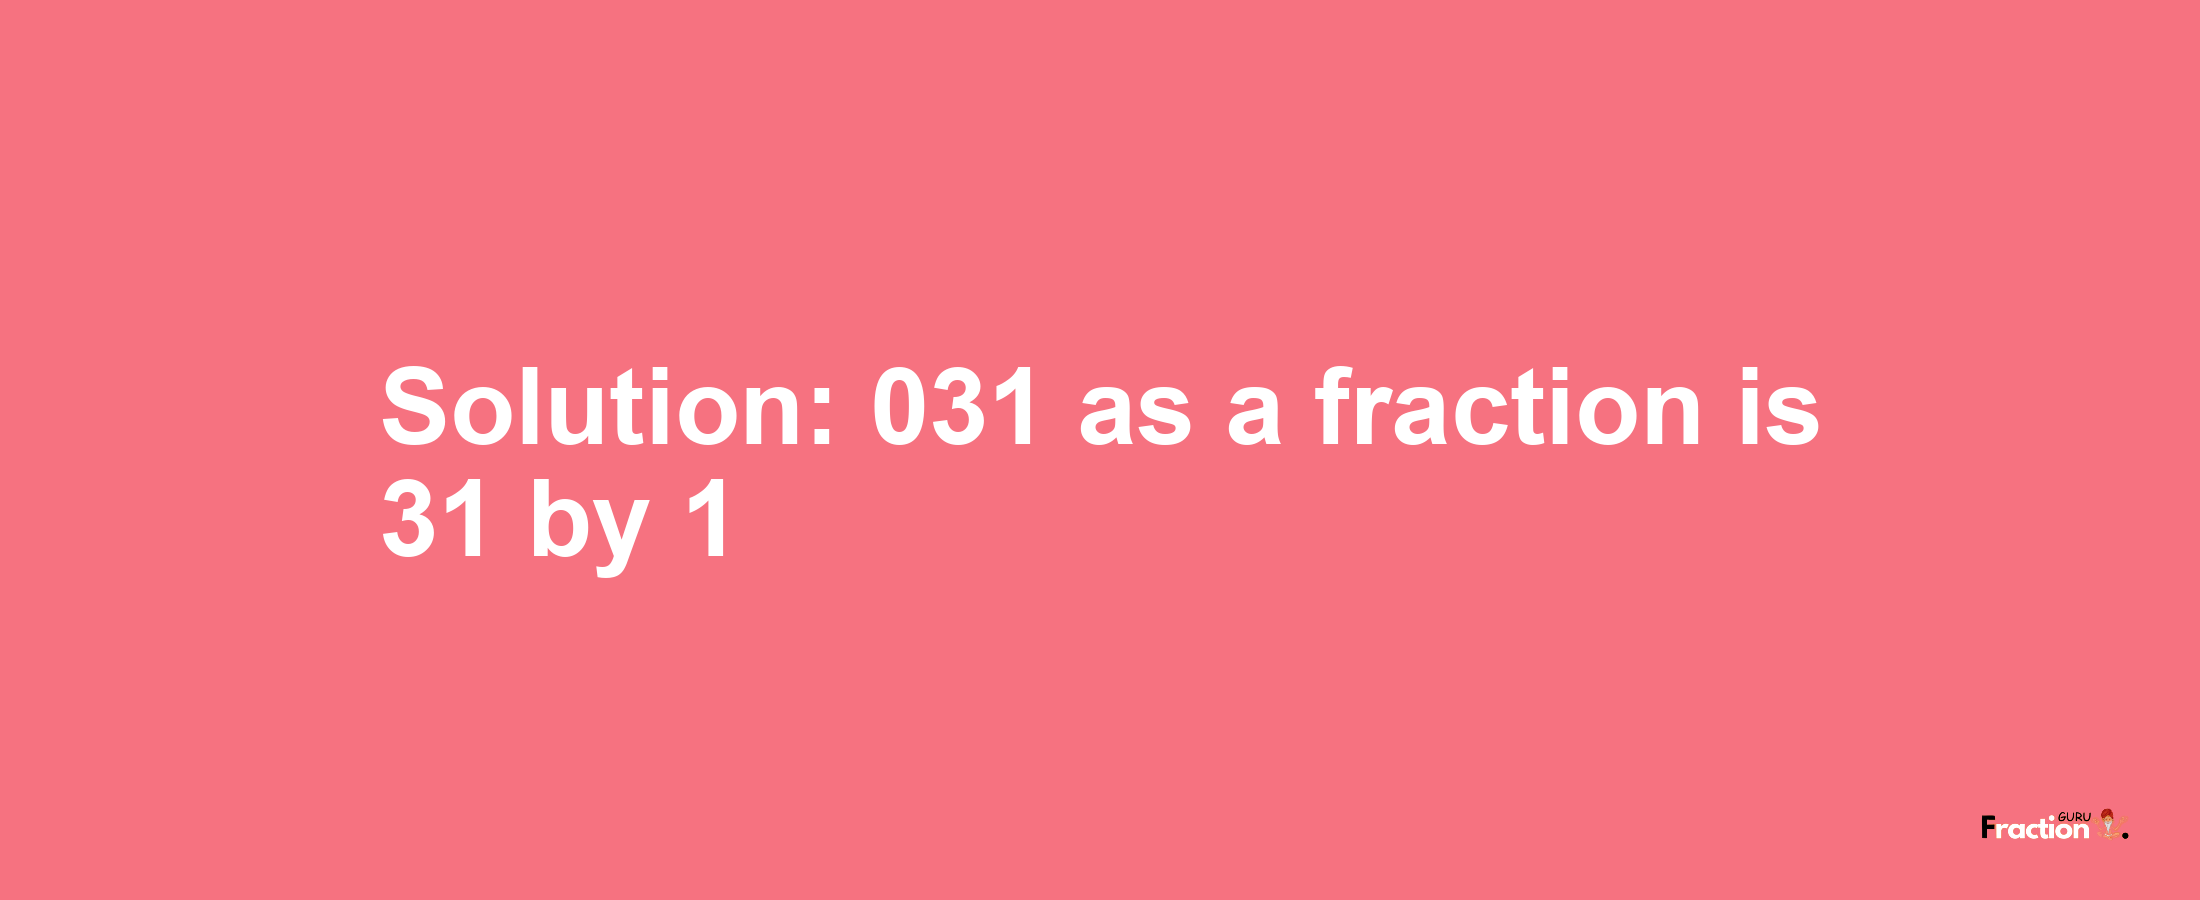 Solution:031 as a fraction is 31/1